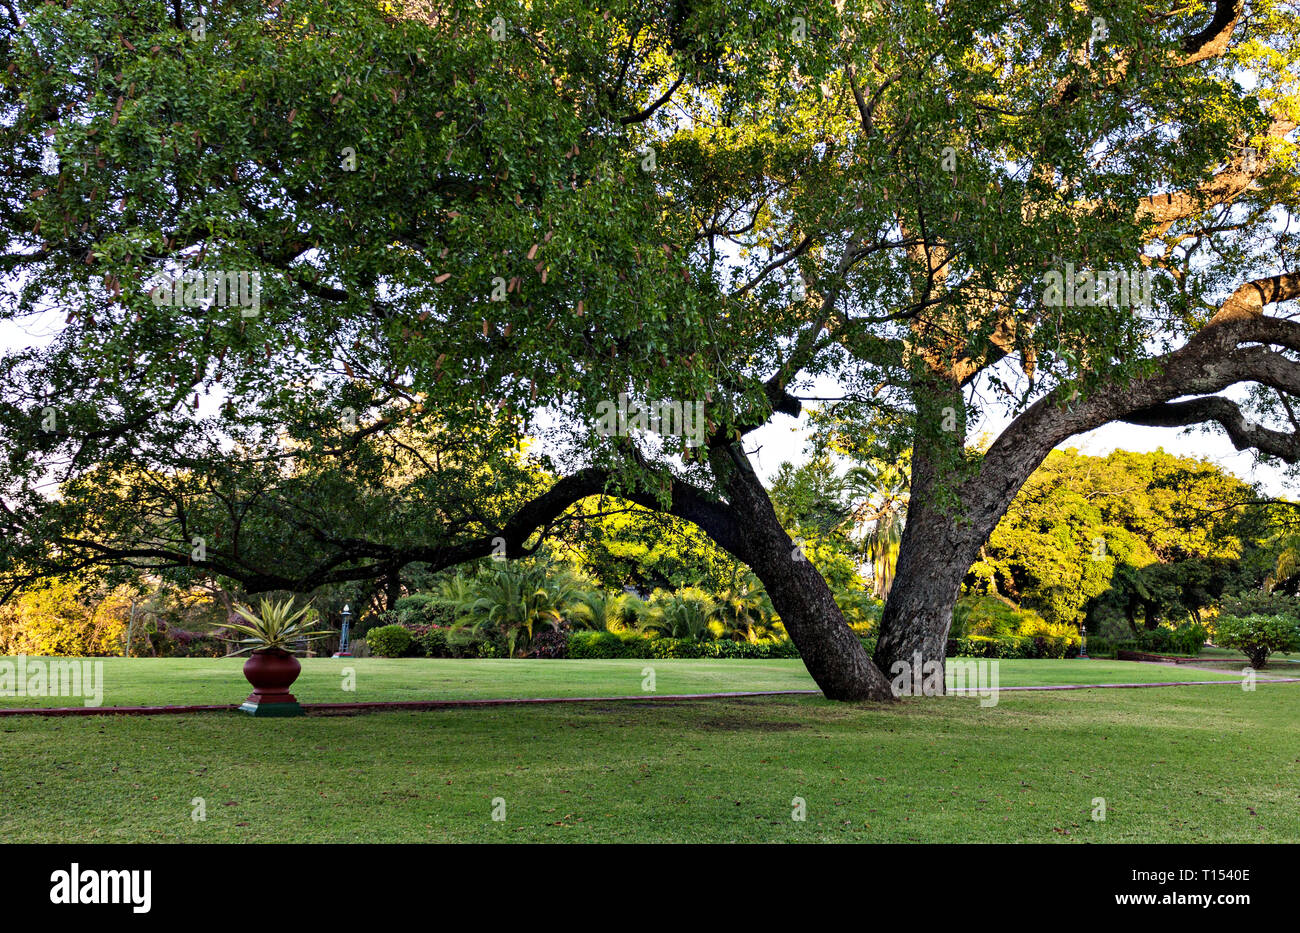 Sprawling Tree Over The Lawn Stock Photo